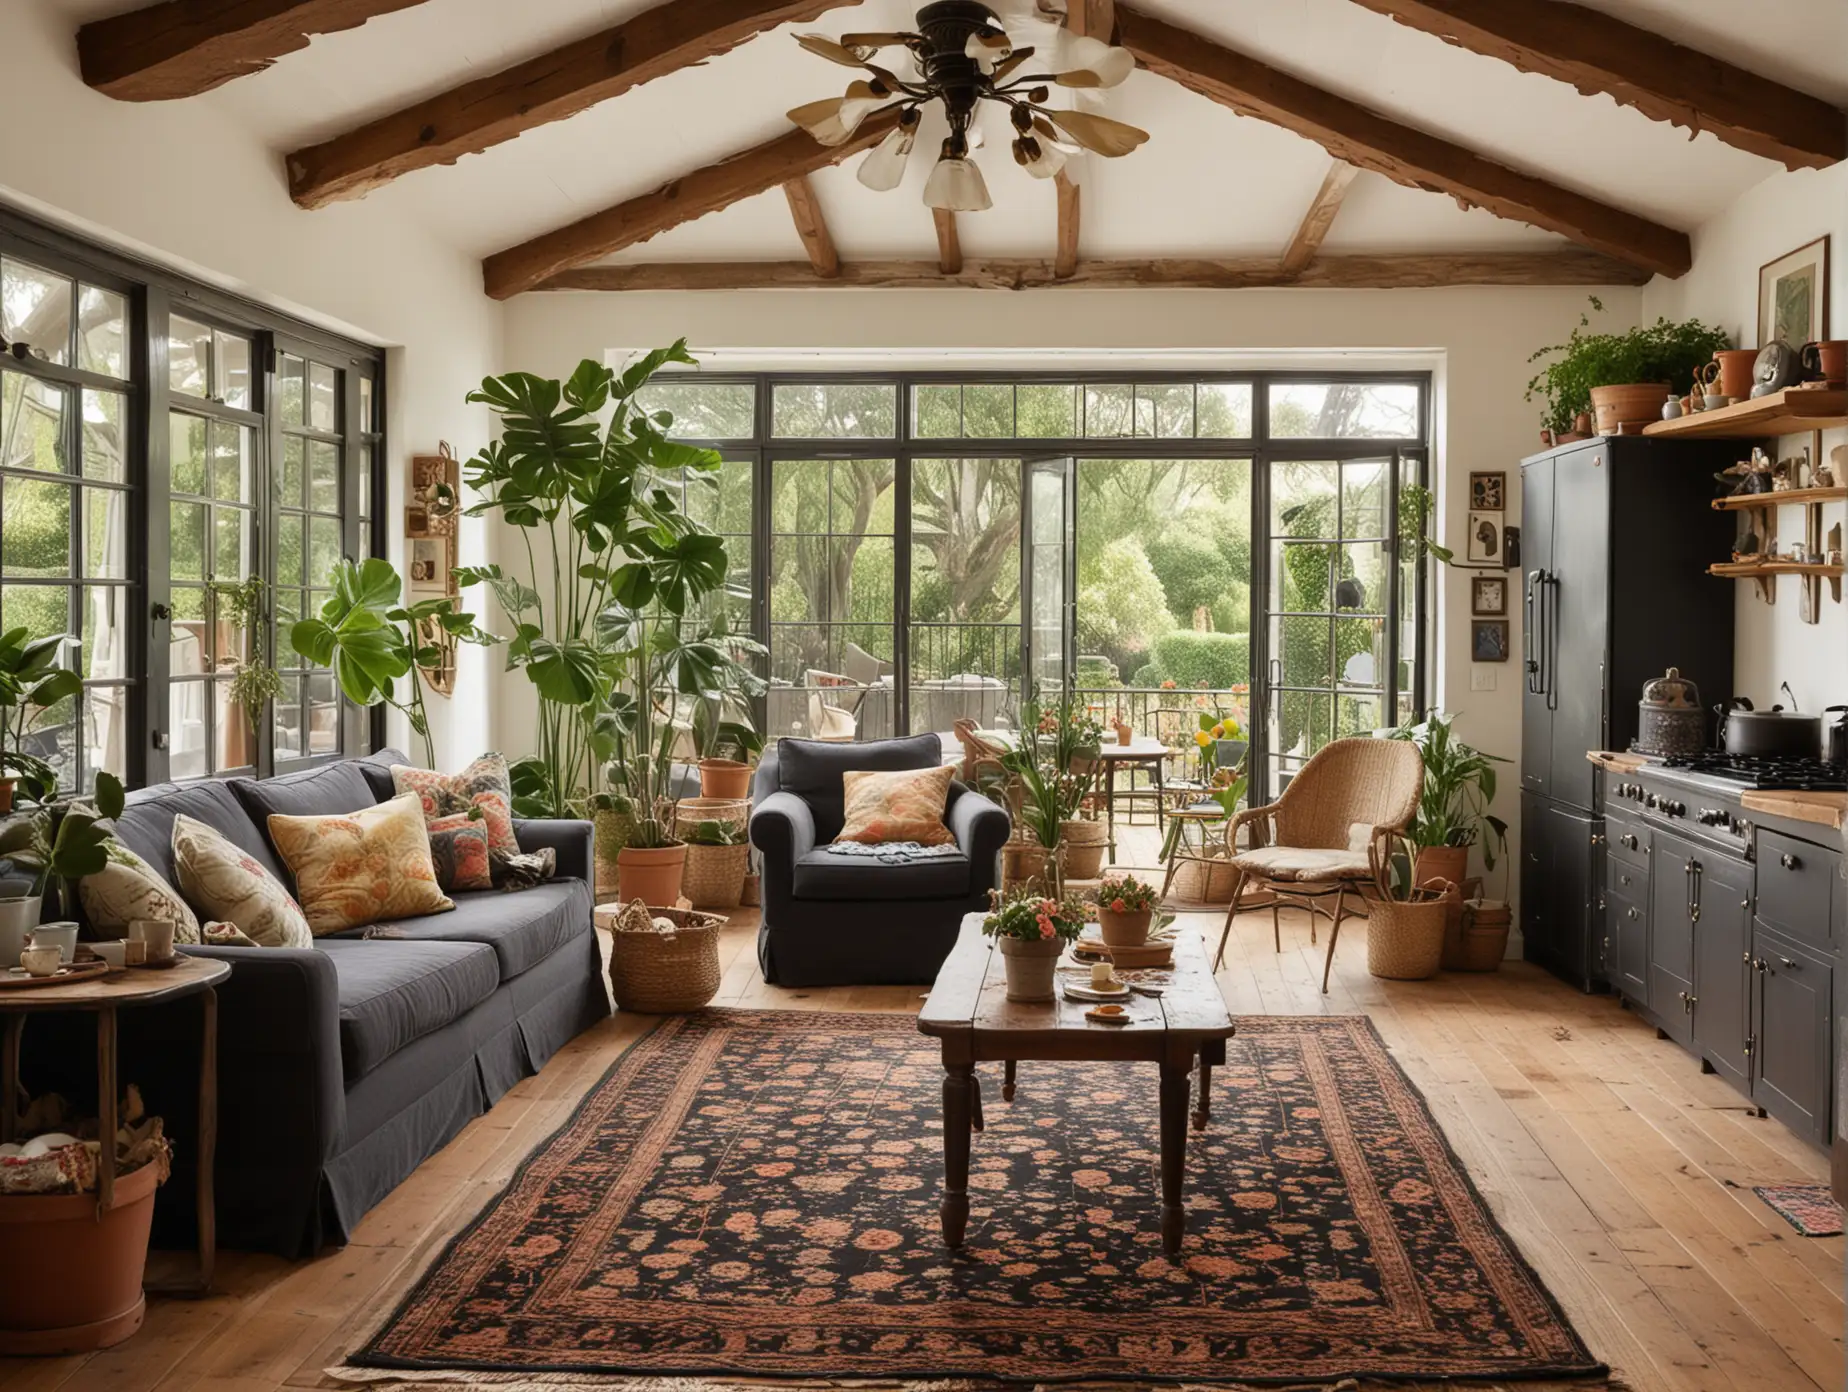 Vintage-Sitting-Room-with-Kitchen-and-Frontyard-Views-Rustic-Charm-and-Spacious-Interiors